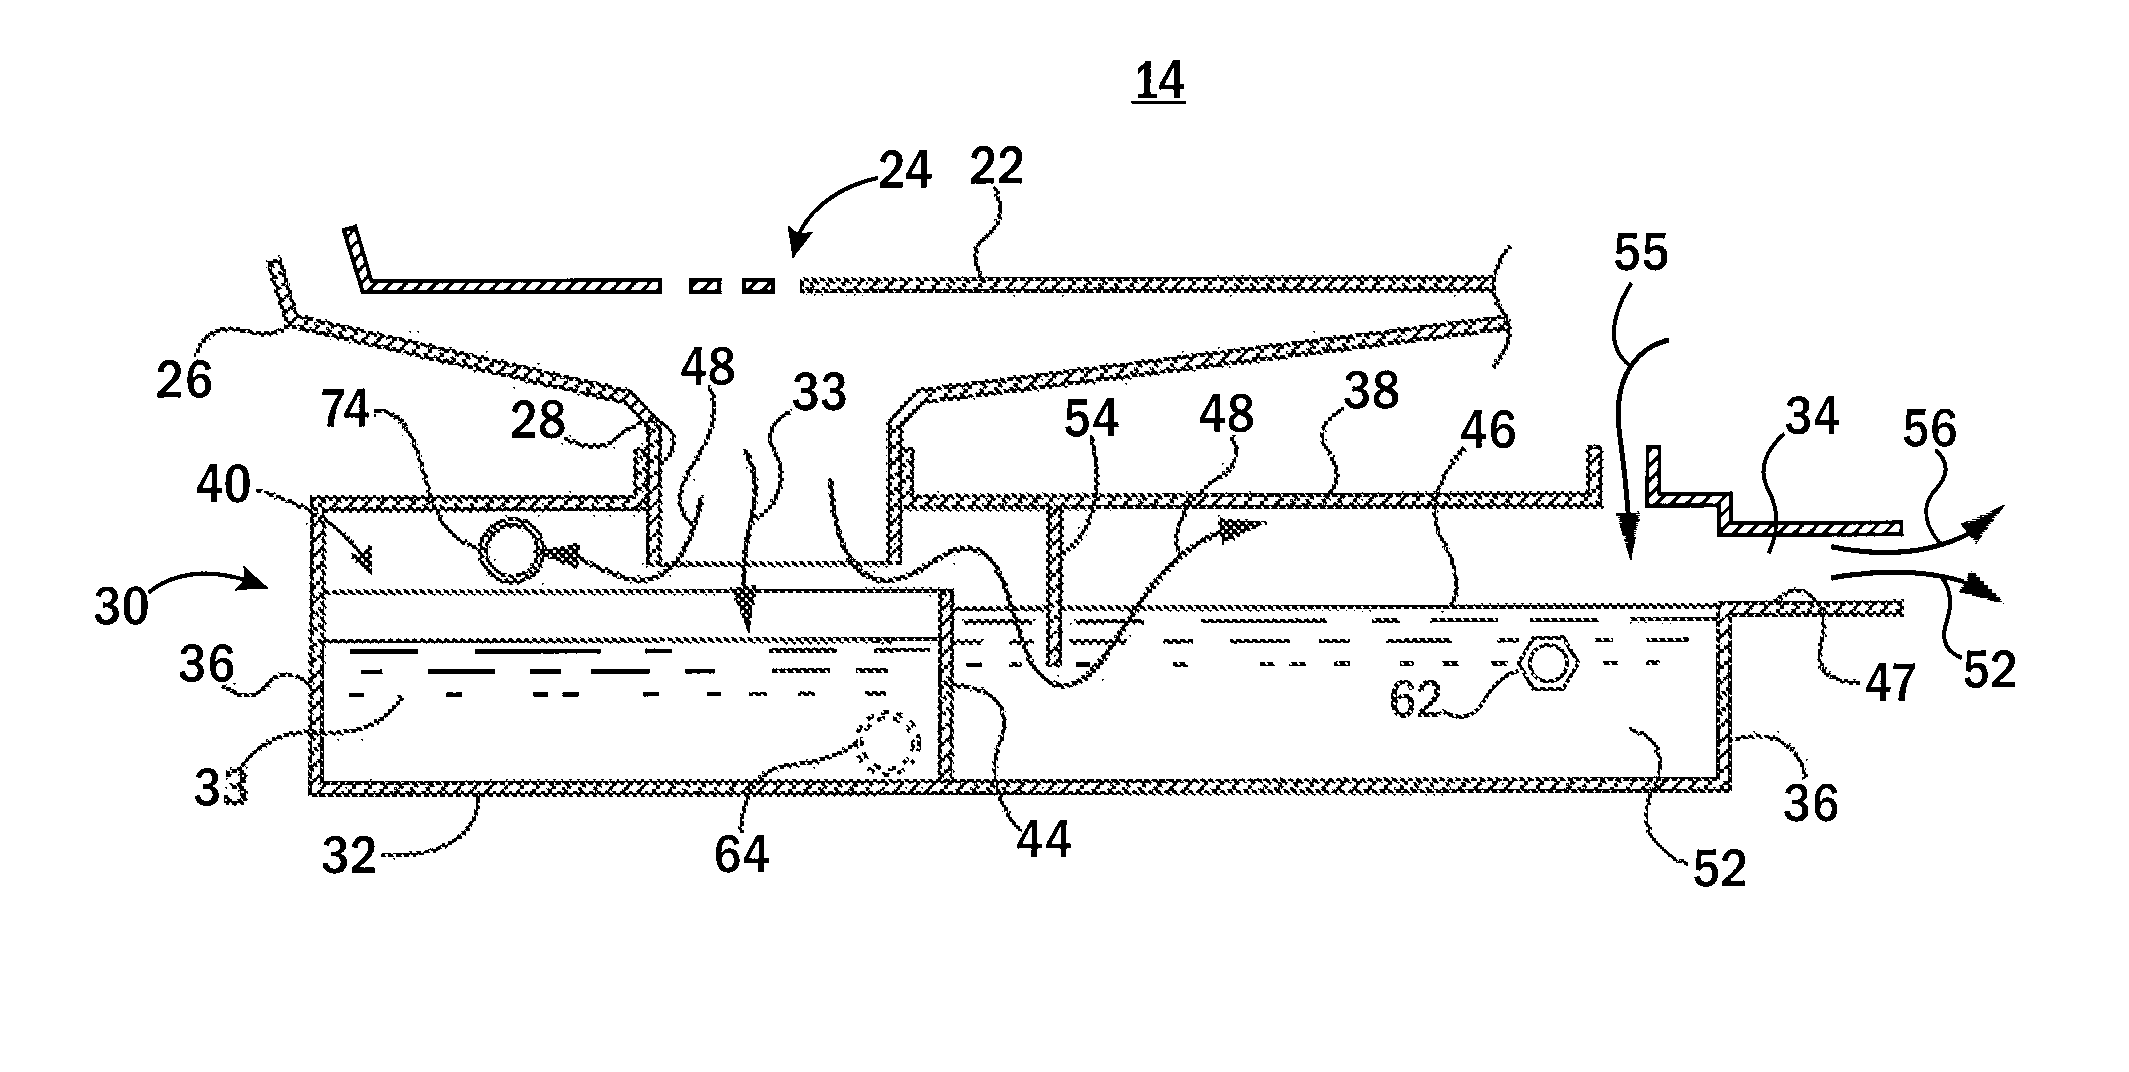 Grease handling apparatus for closed system oven